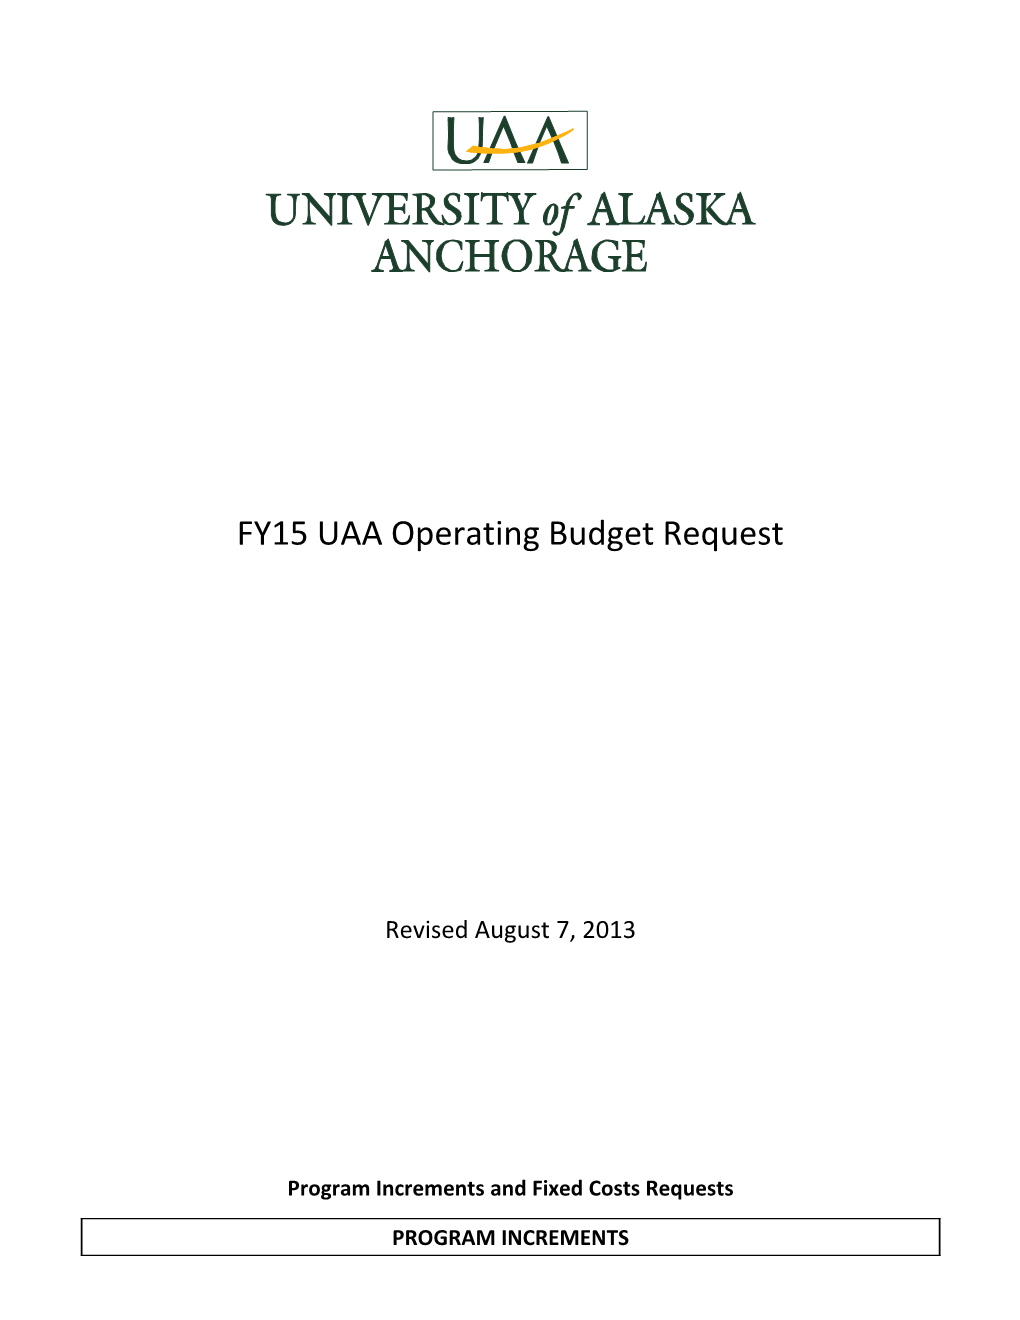 Summary of FY15 Operating Budget Requests